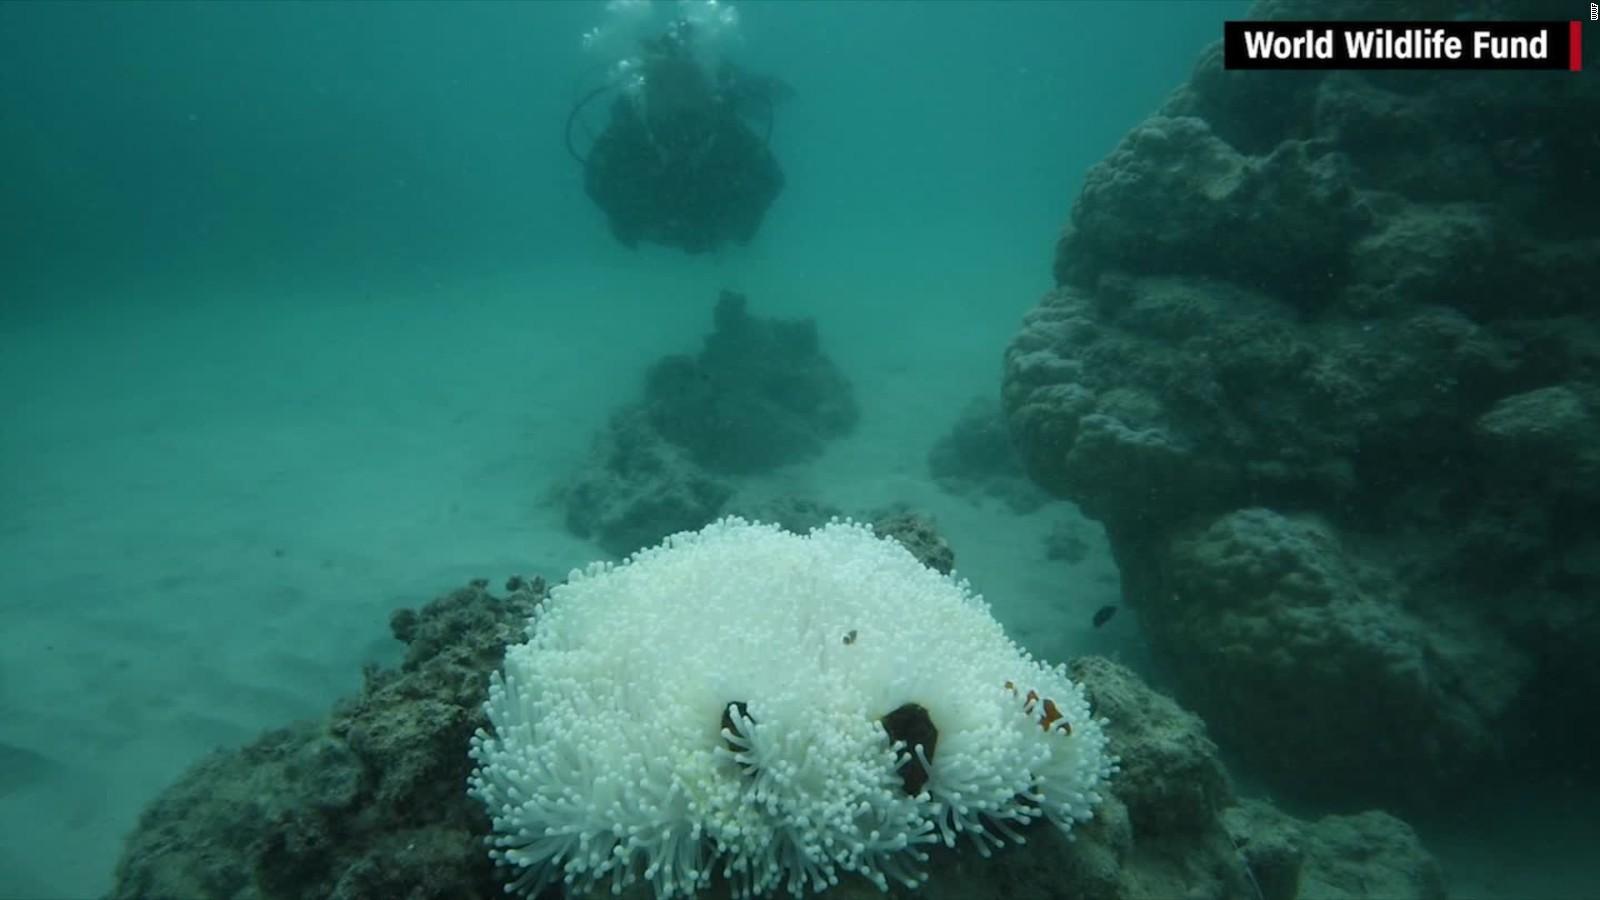 image show coral bleaching in Great Barrier Reef